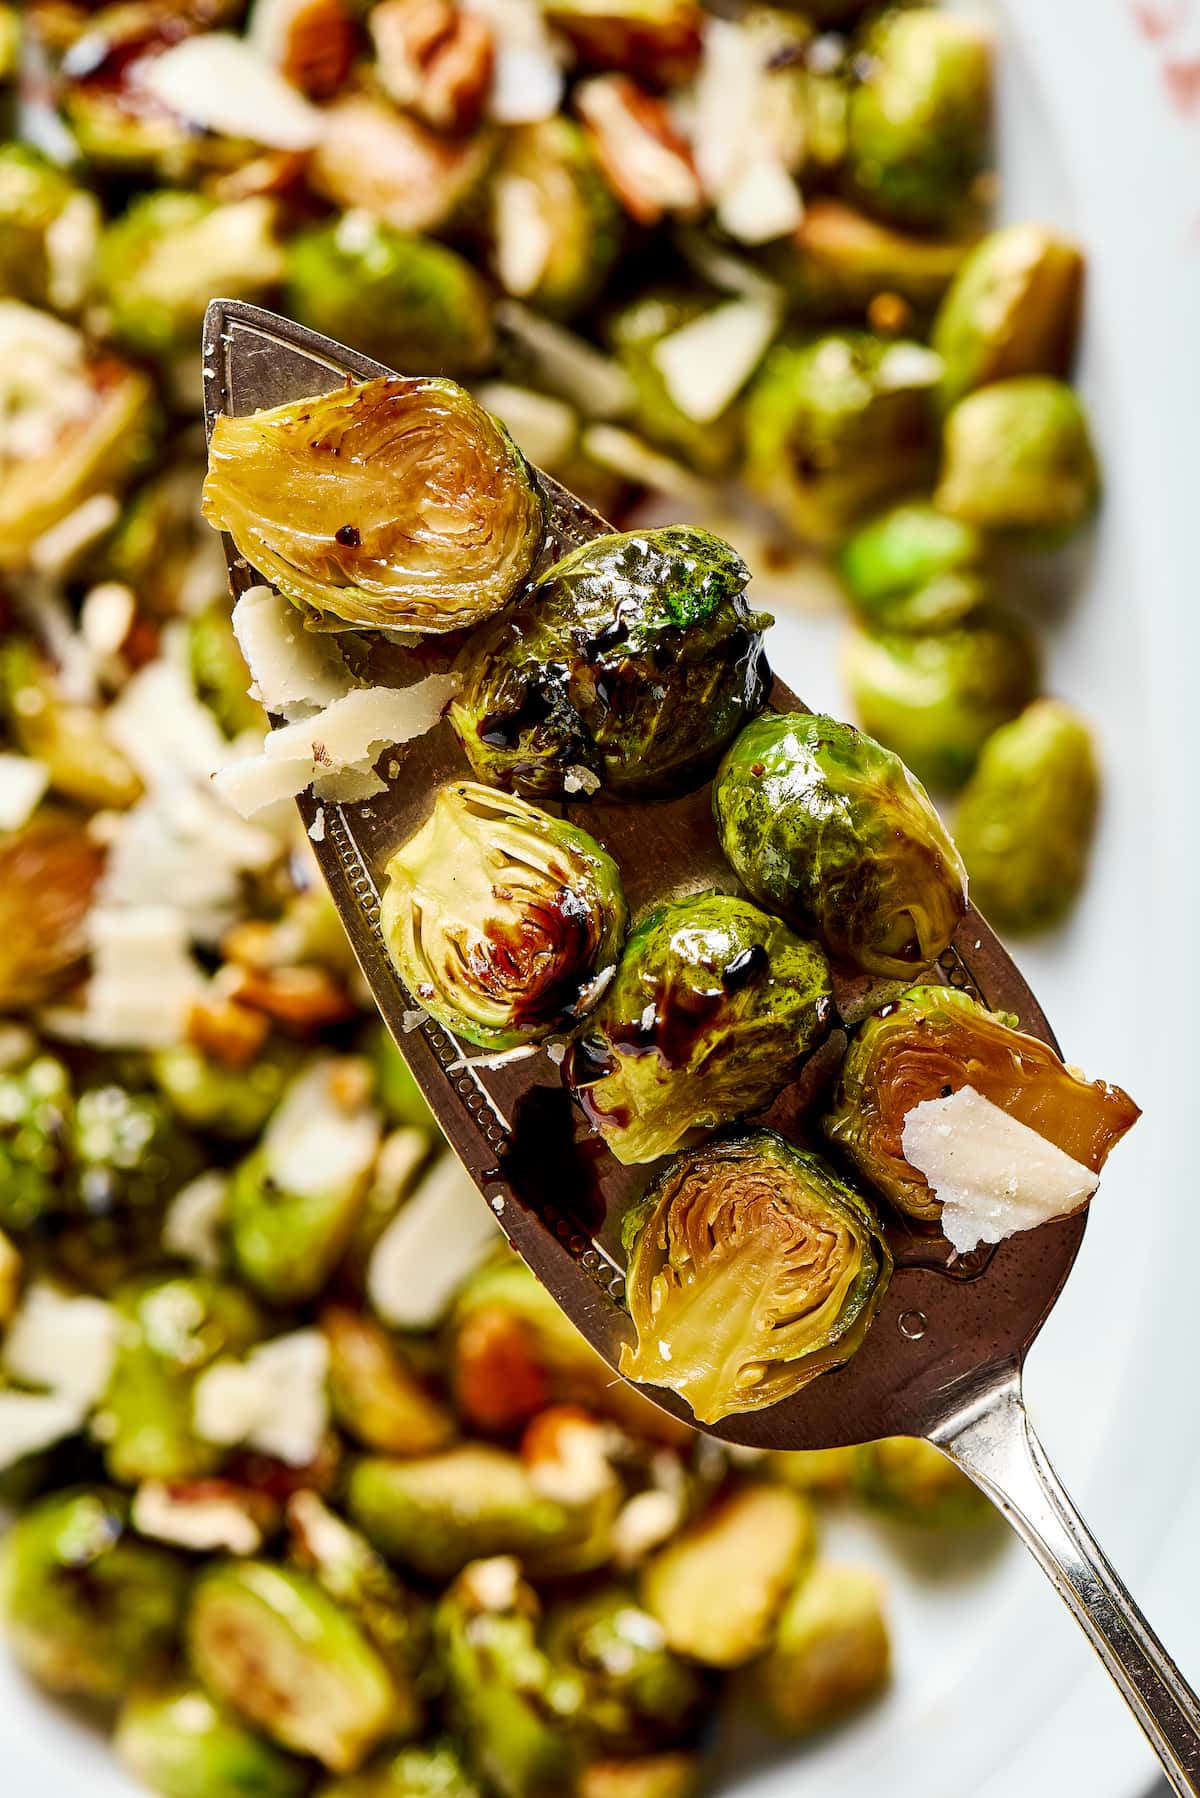 A serving spoon with a serving of roasted Brussels sprouts on it, with a pan of Brussels sprouts covered in parmesan flakes in the background